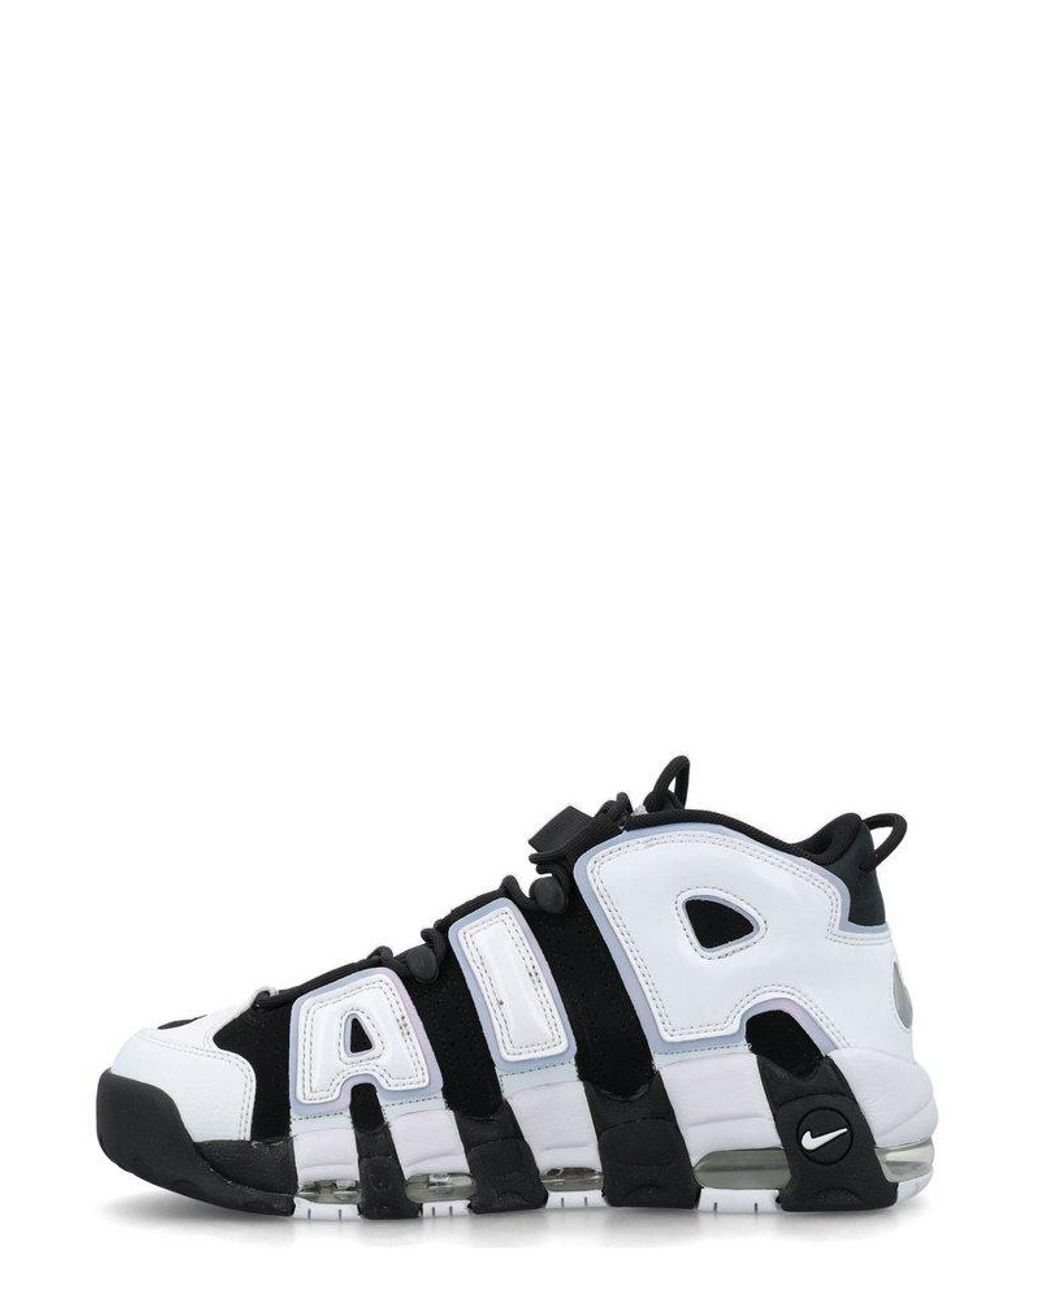 Nike Air More Uptempo 96 Lace-up Sneakers in Black | Lyst